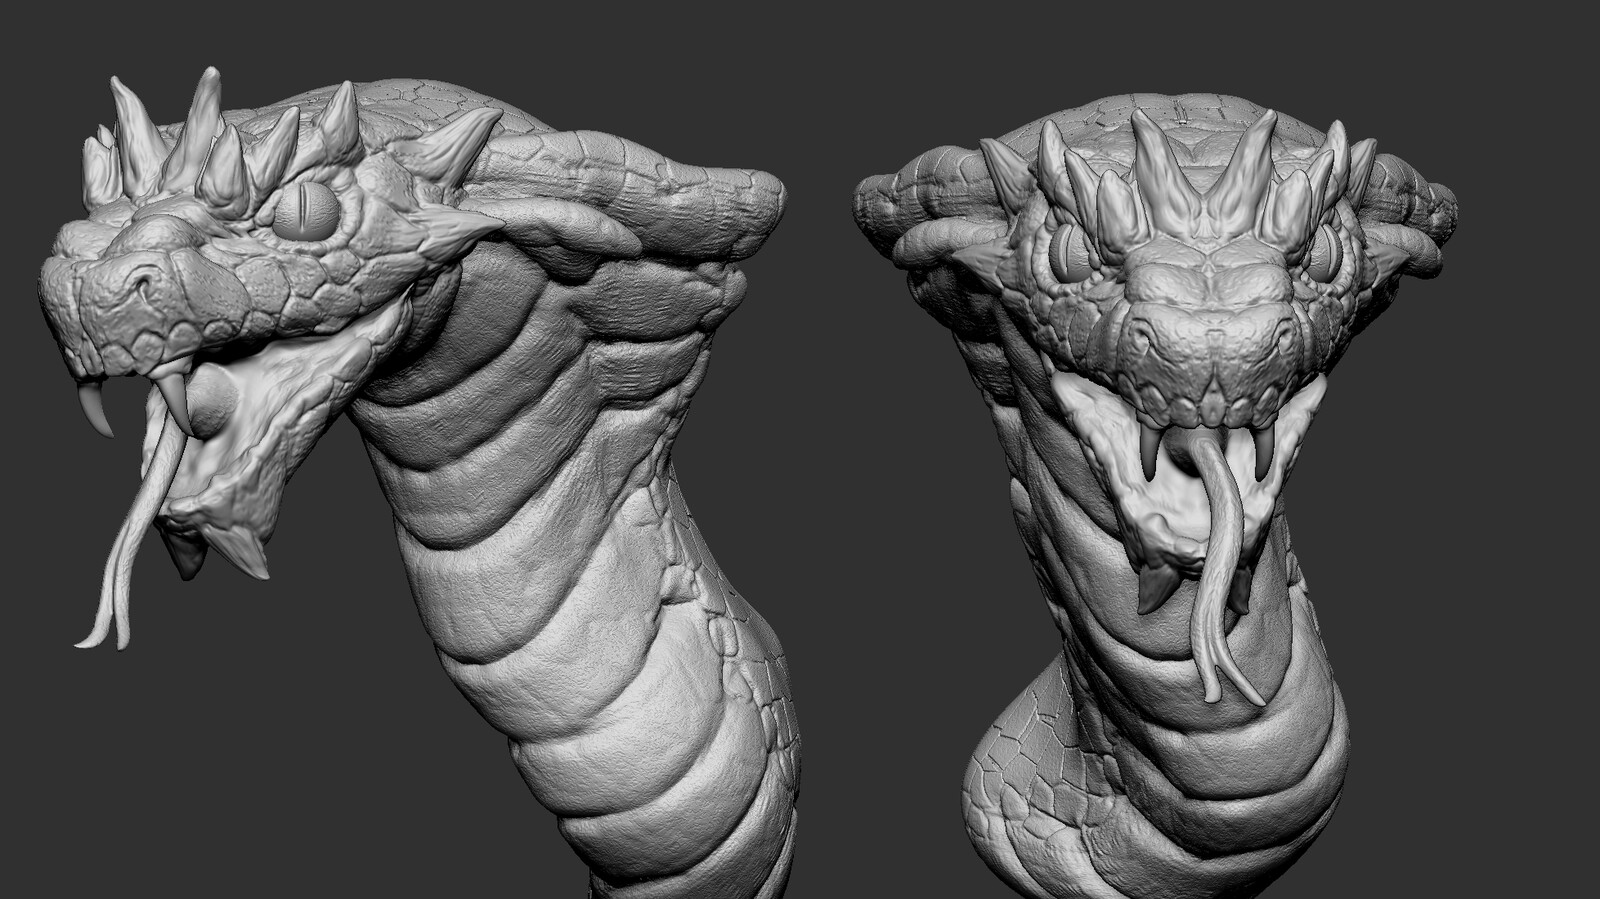 3D model of the giant serpent I designed and sculpted in Zbrush